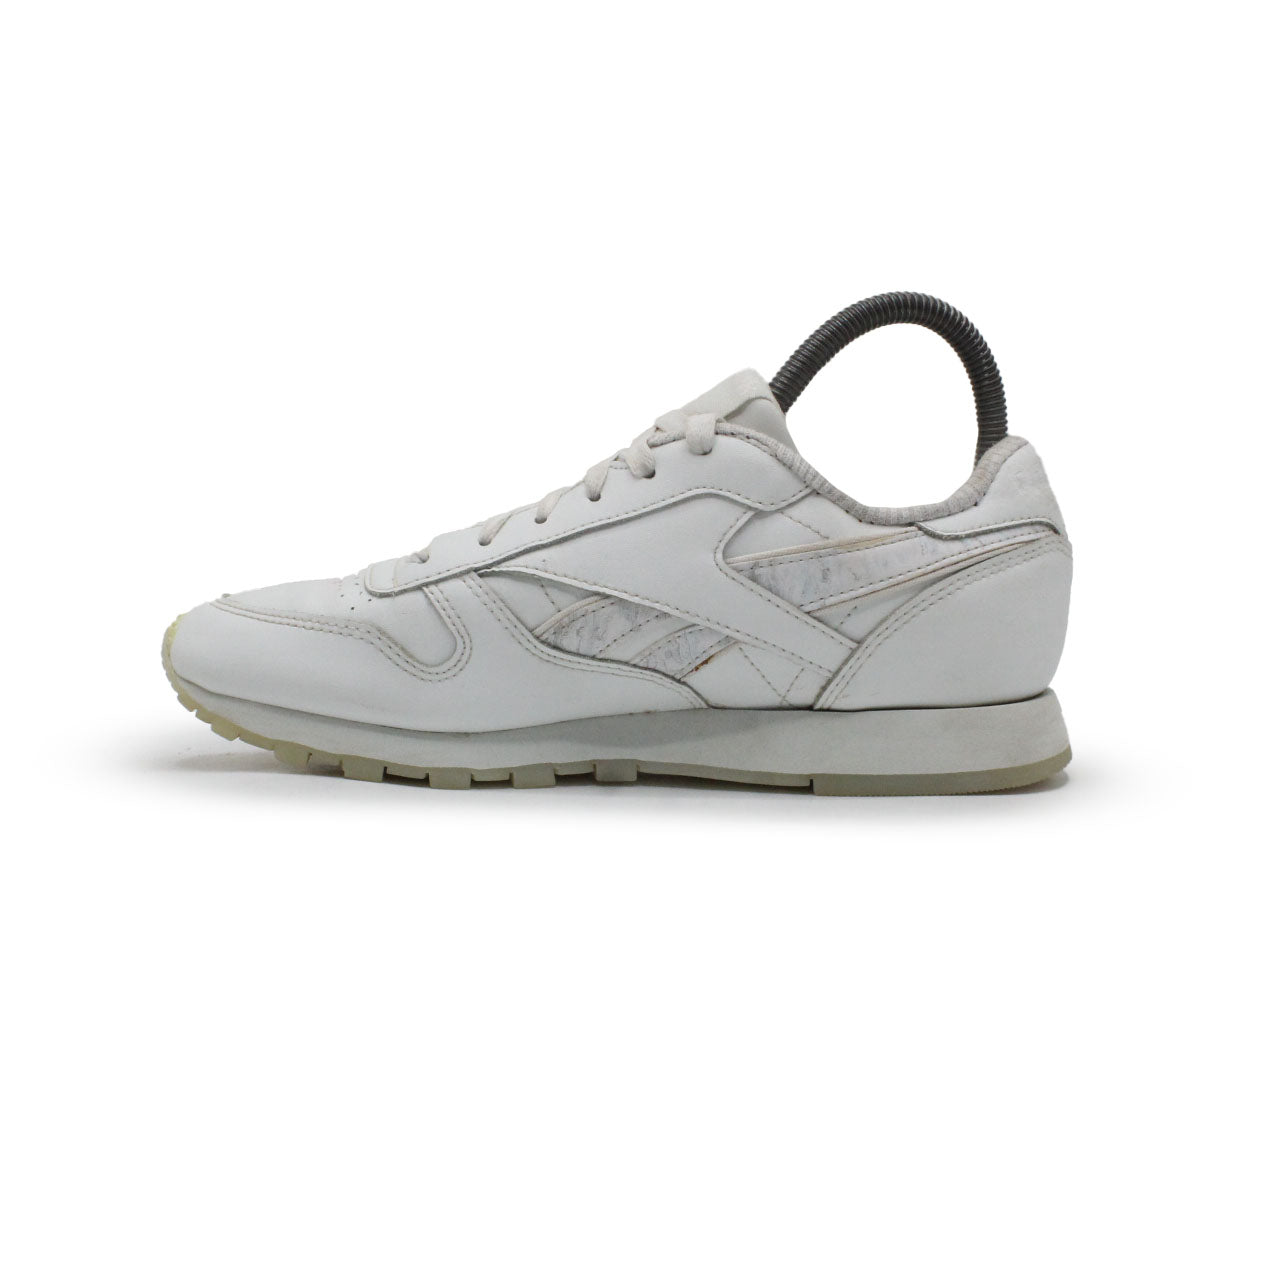 Reebok Classic Leather Low Top Shoe